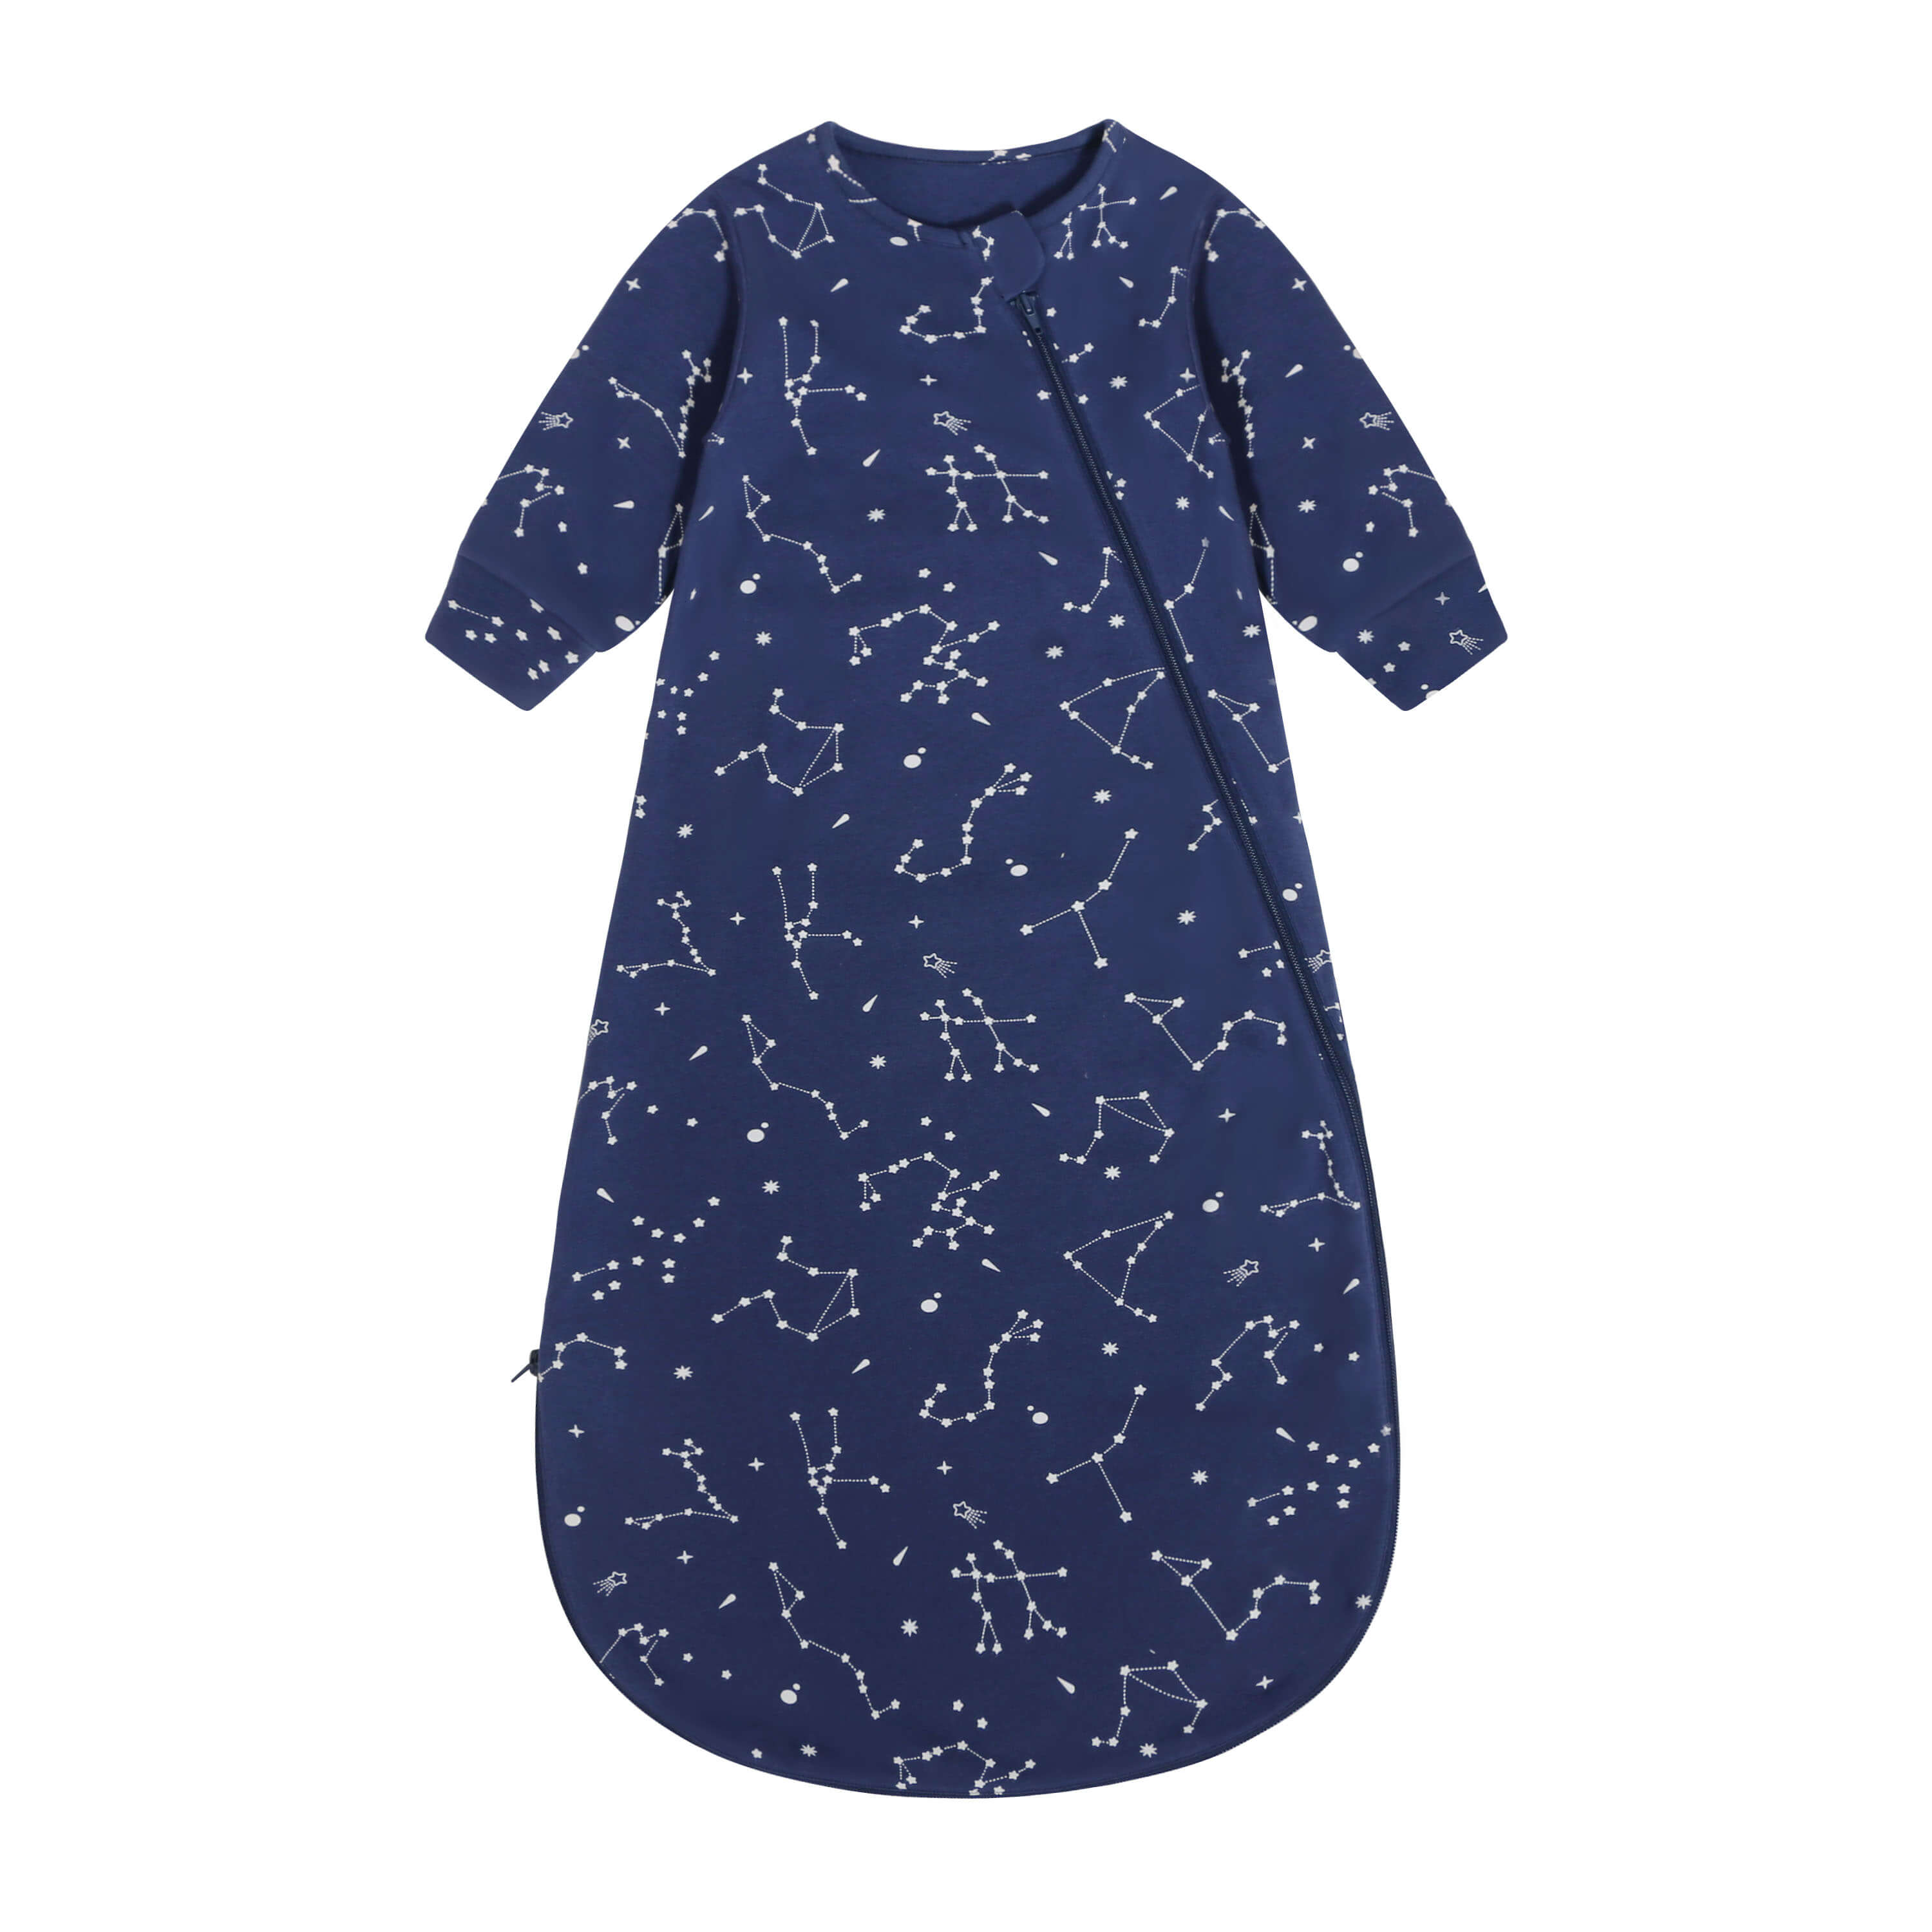 Camel Wool Winter Sleep Sack With Arms 3.5 TOG - Constellation